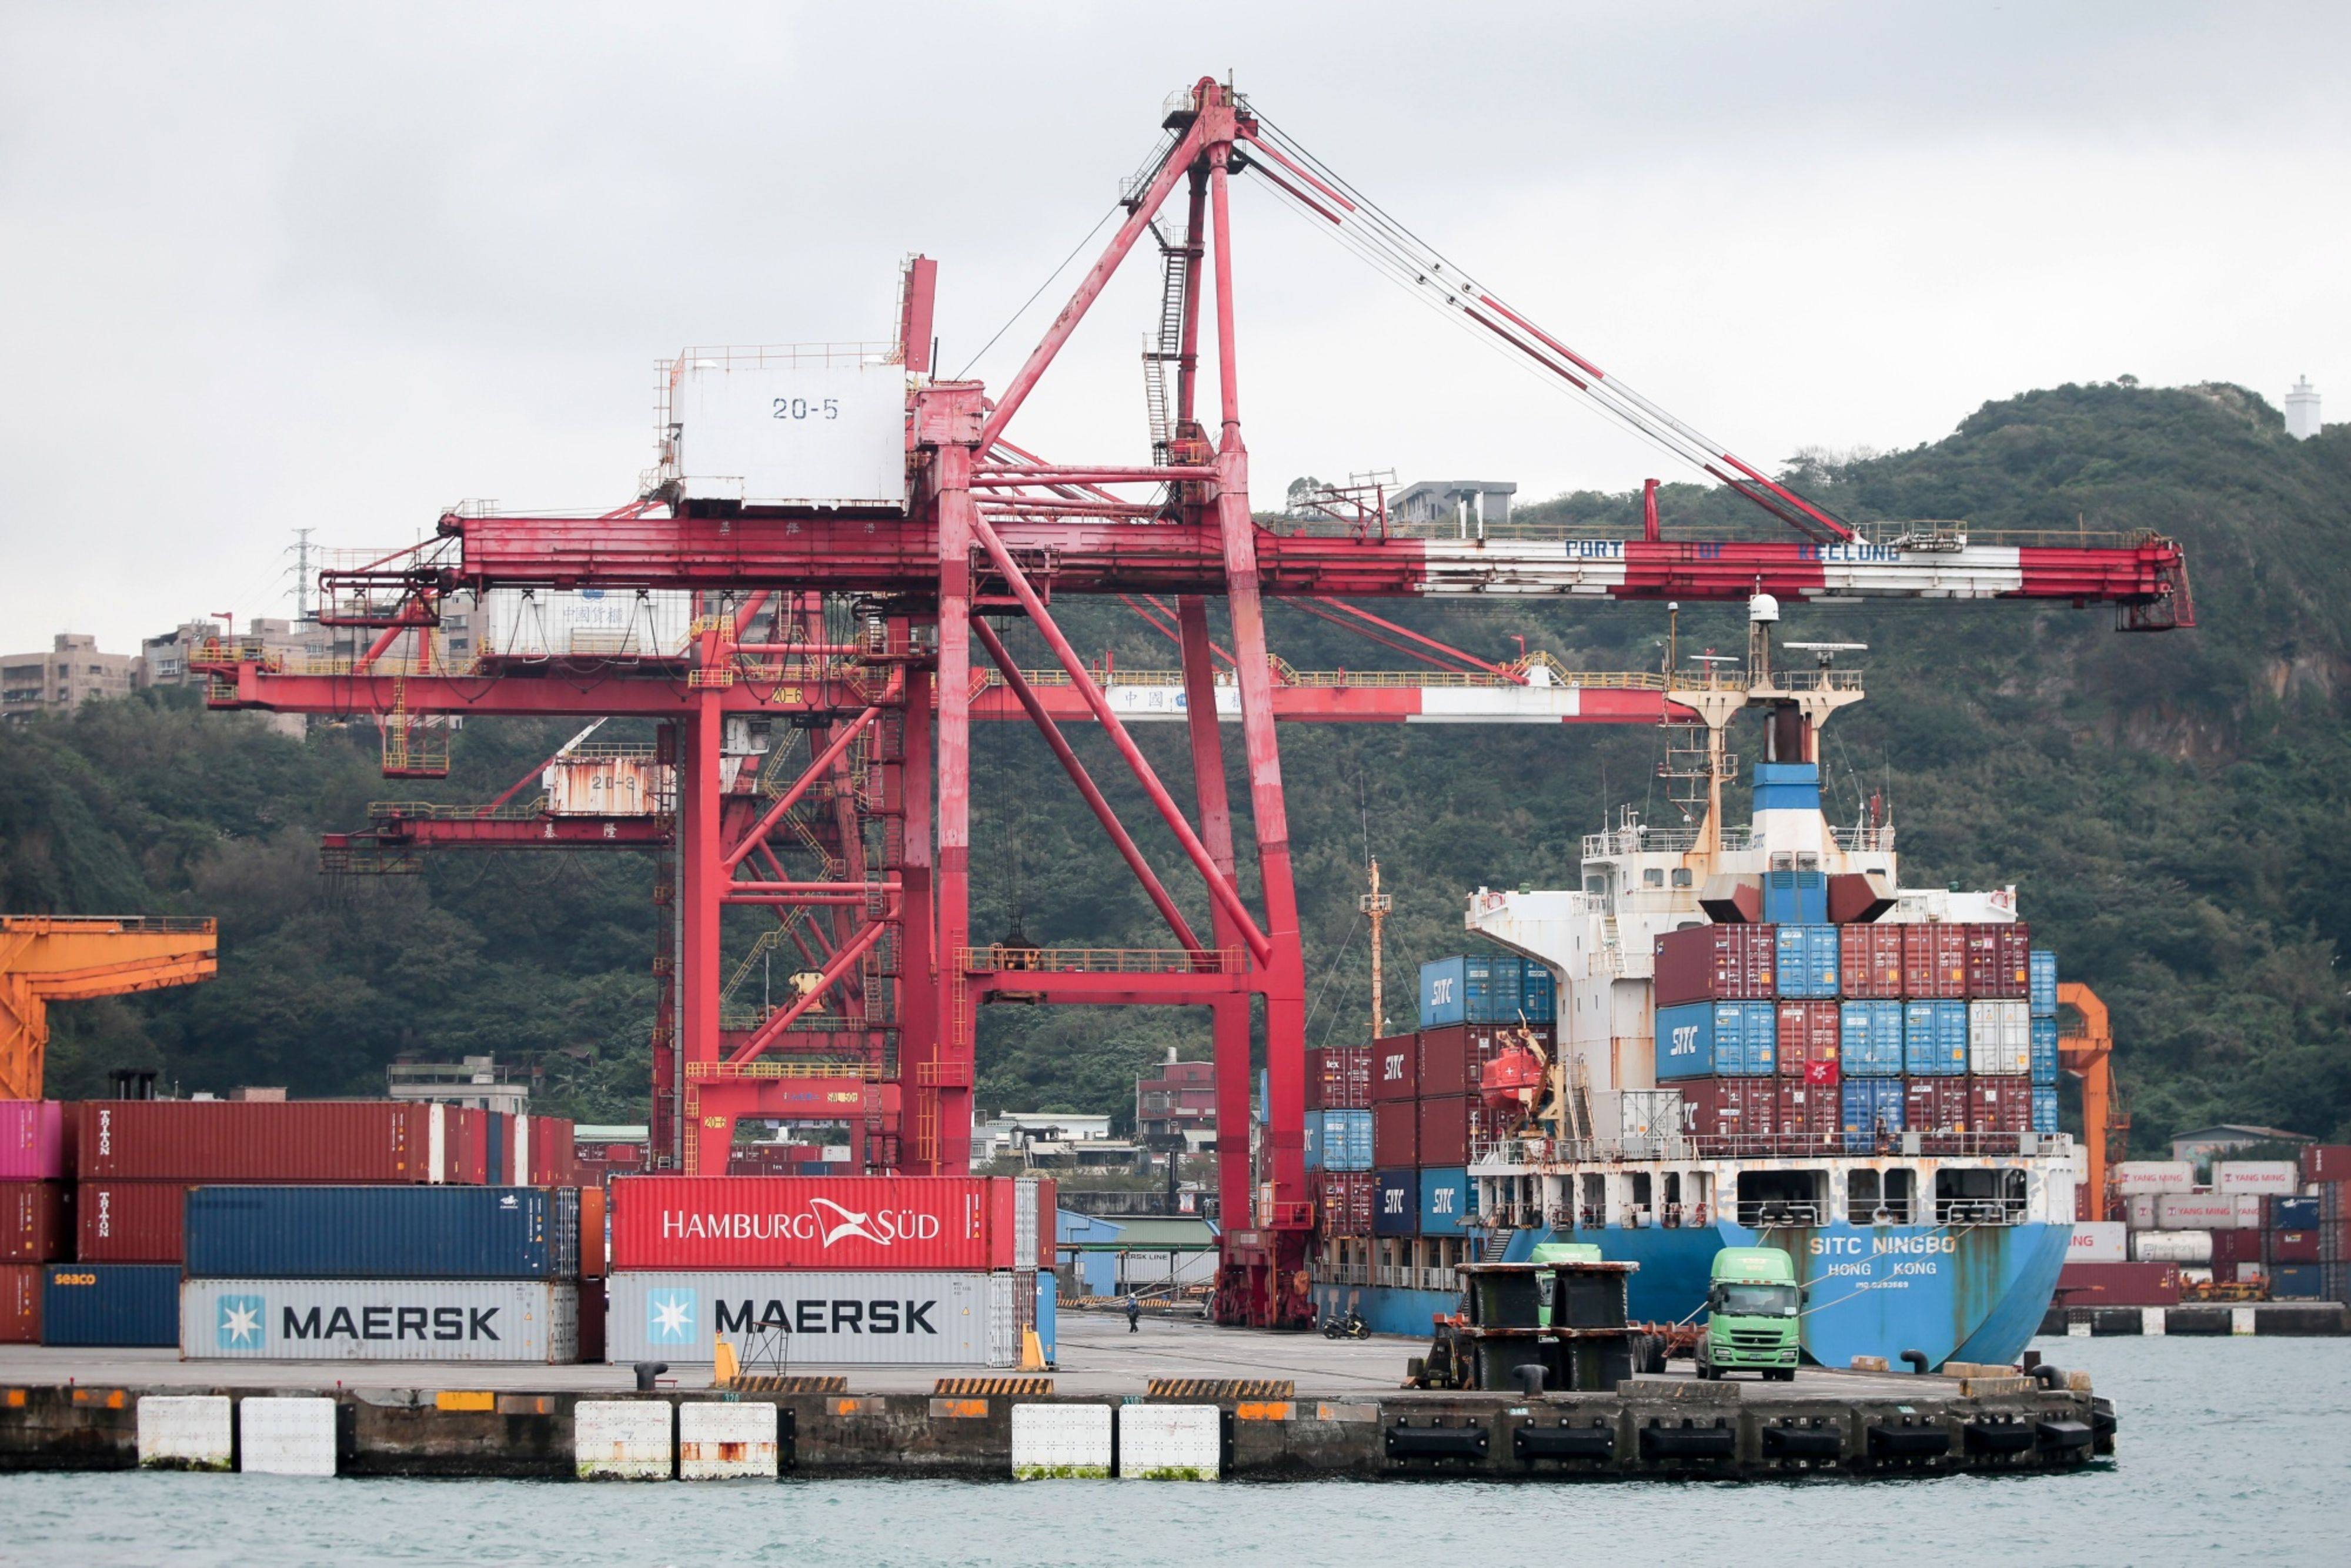 Taiwan’s exports entered a growth pattern in November after a period of sustained decline and a few erratic months. Photo: Bloomberg